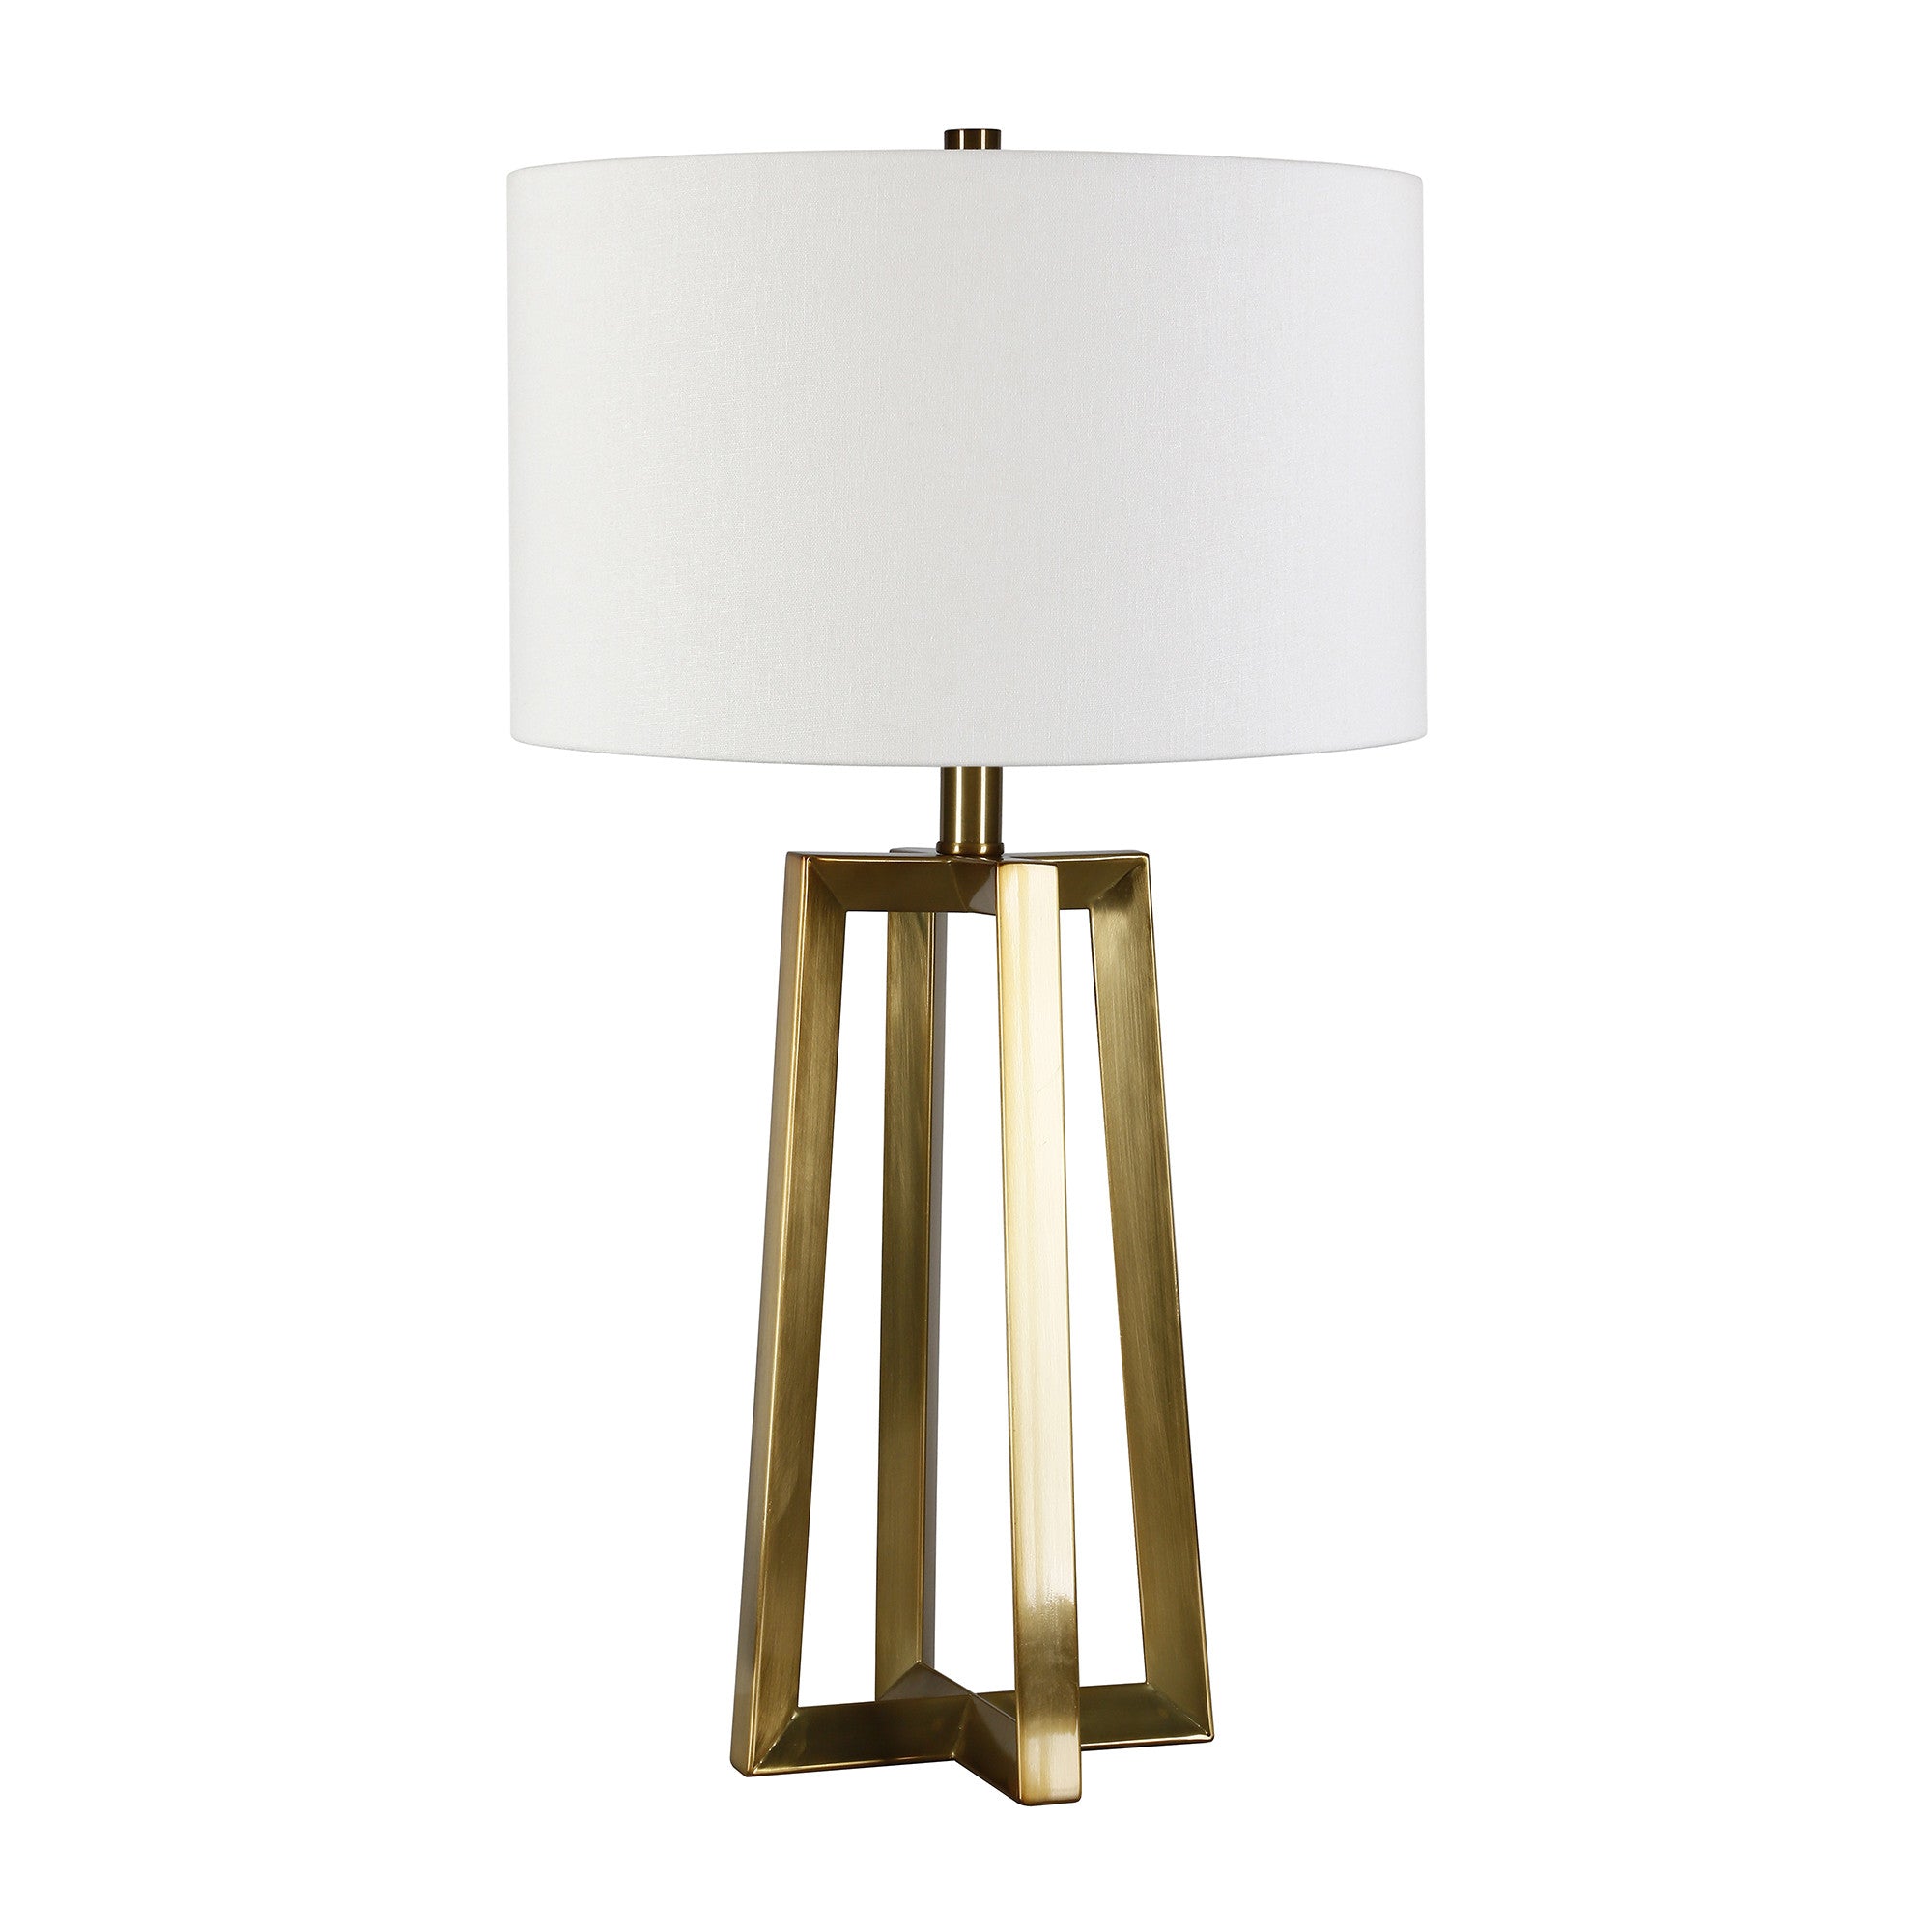 24" Brass Metal Table Lamp With White Drum Shade